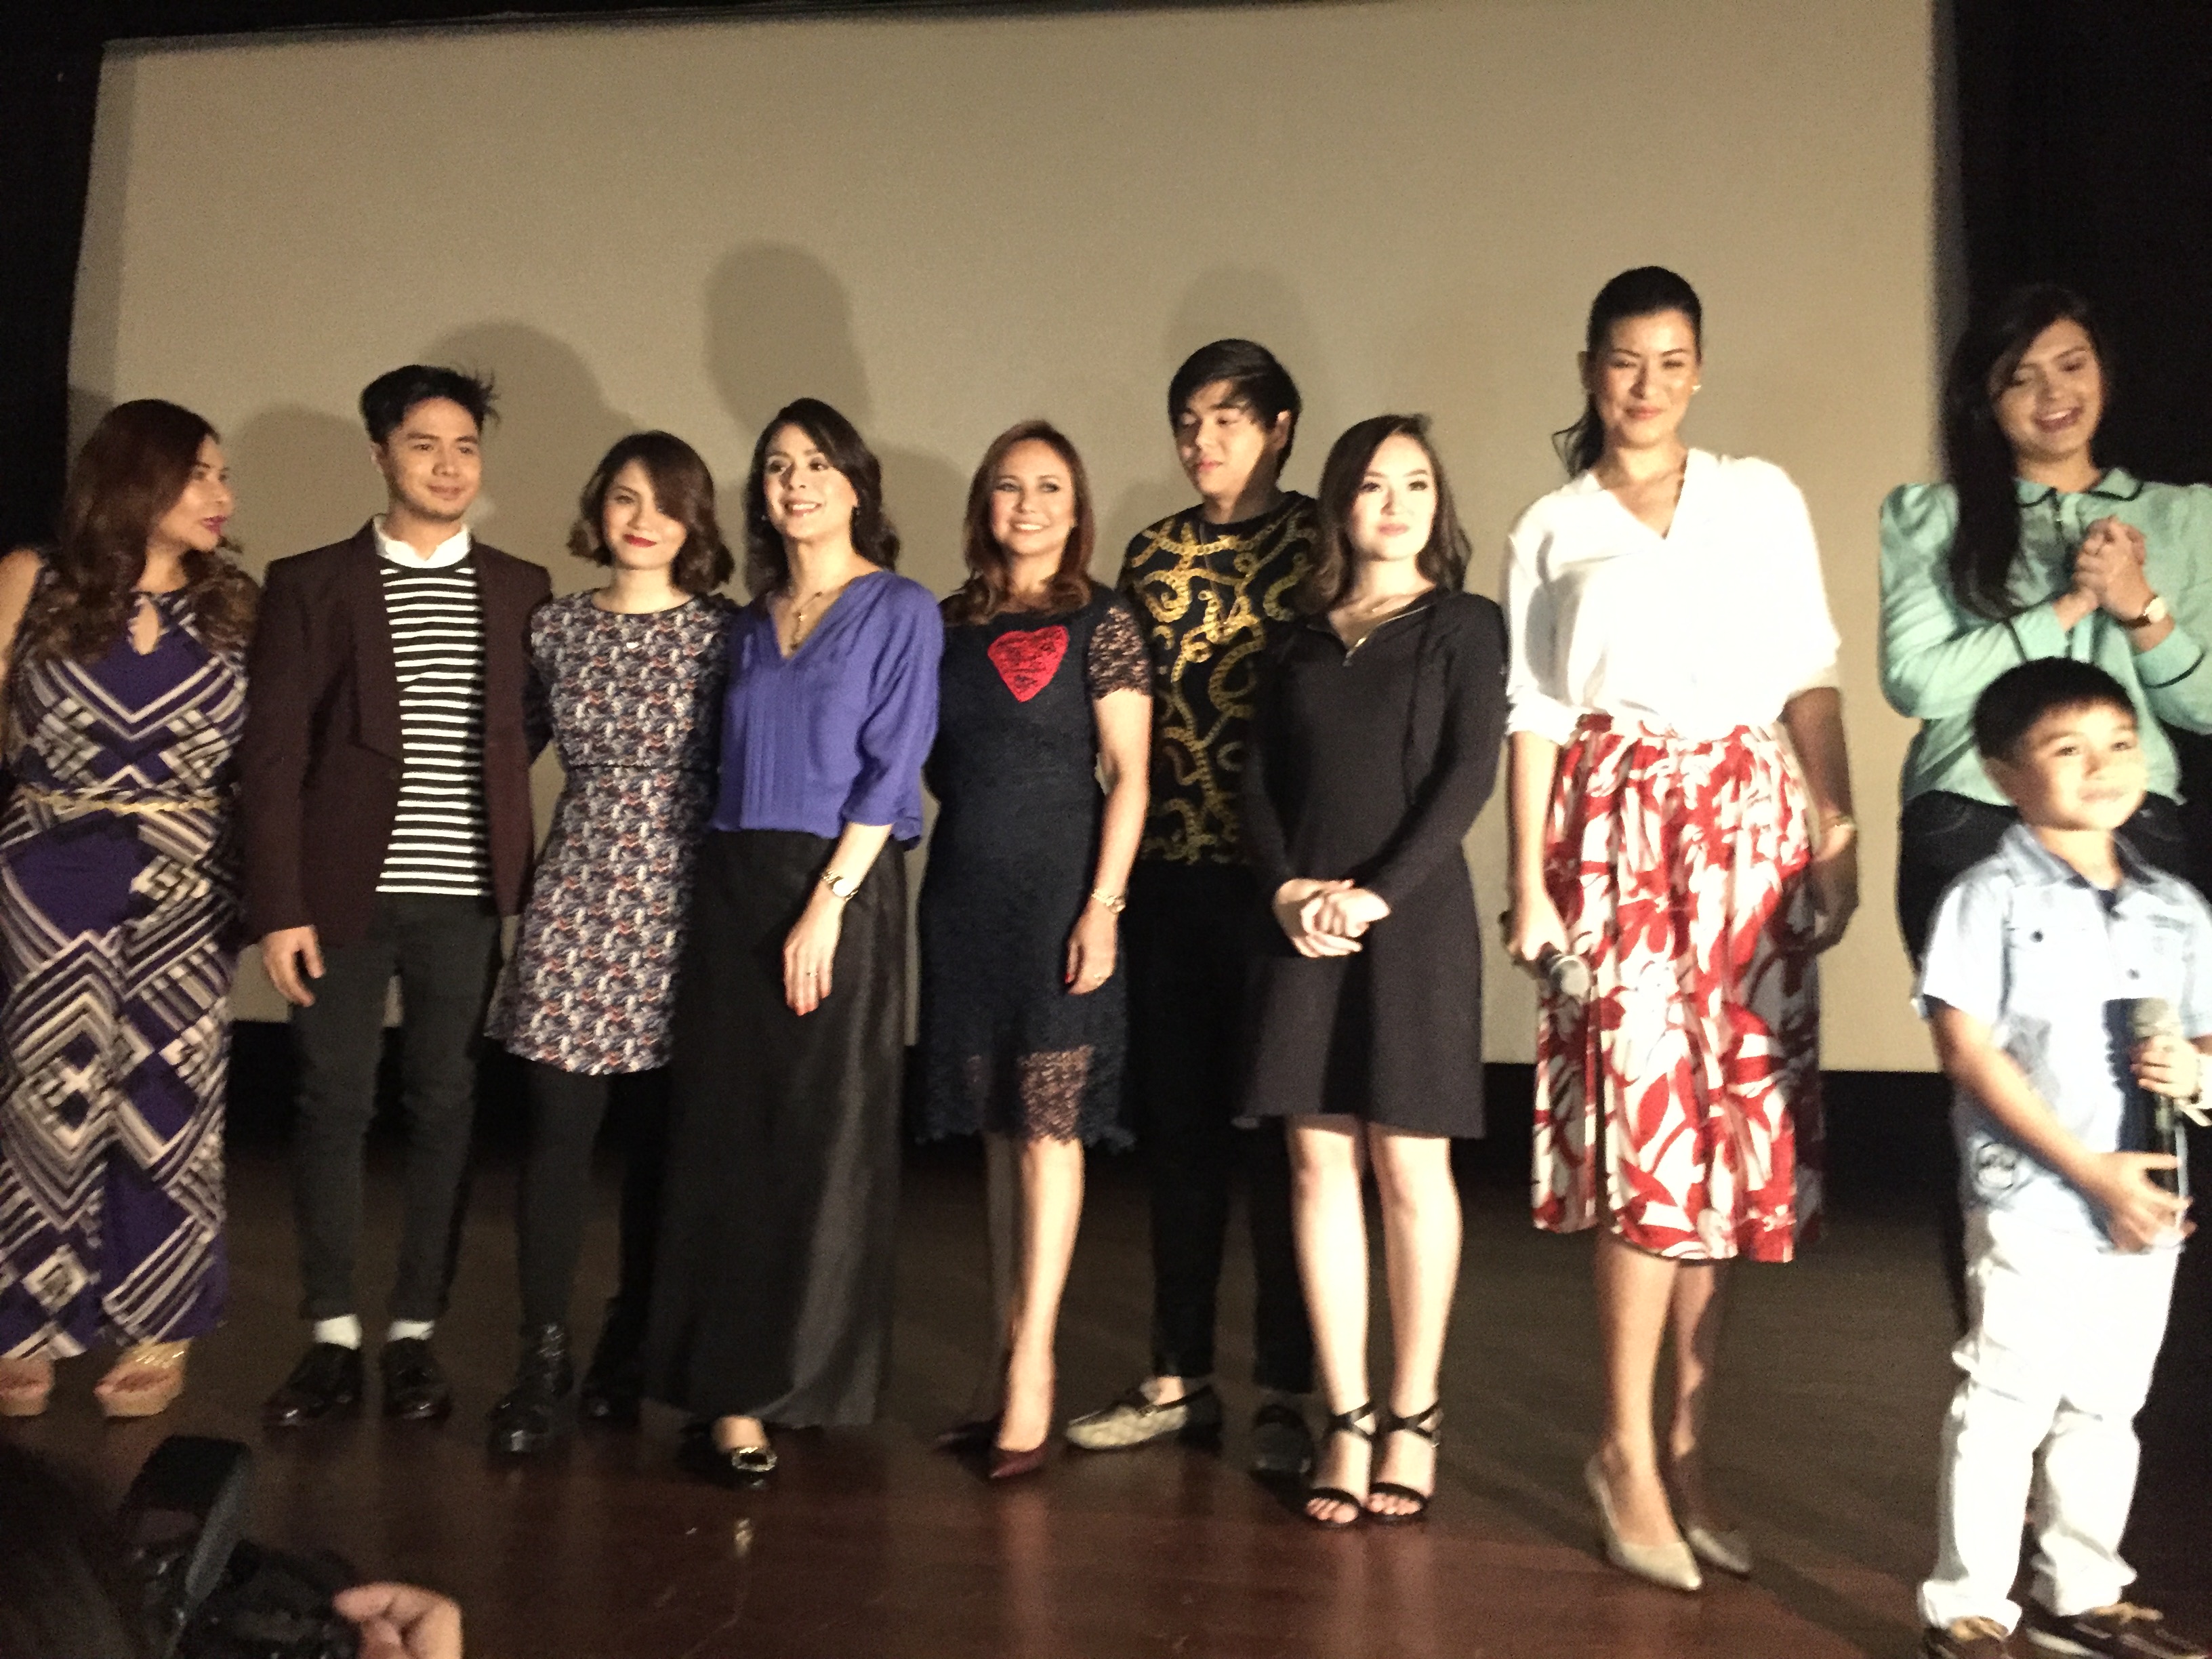 The cast of "You're My Home" pose for a photo during a special screening for the drama held on Monday at ABS-CBN's Dolphy Theater. Some of the cast members are (from left) Mimi Aguilar, Sam Concepcion, Jessy Mendiola, Dawn Zulueta, Jobelle Salvador, Paul Salas, Mika de la Cruz, Assunta de Rossi, Claire Ruiz and Raikko Mateo.